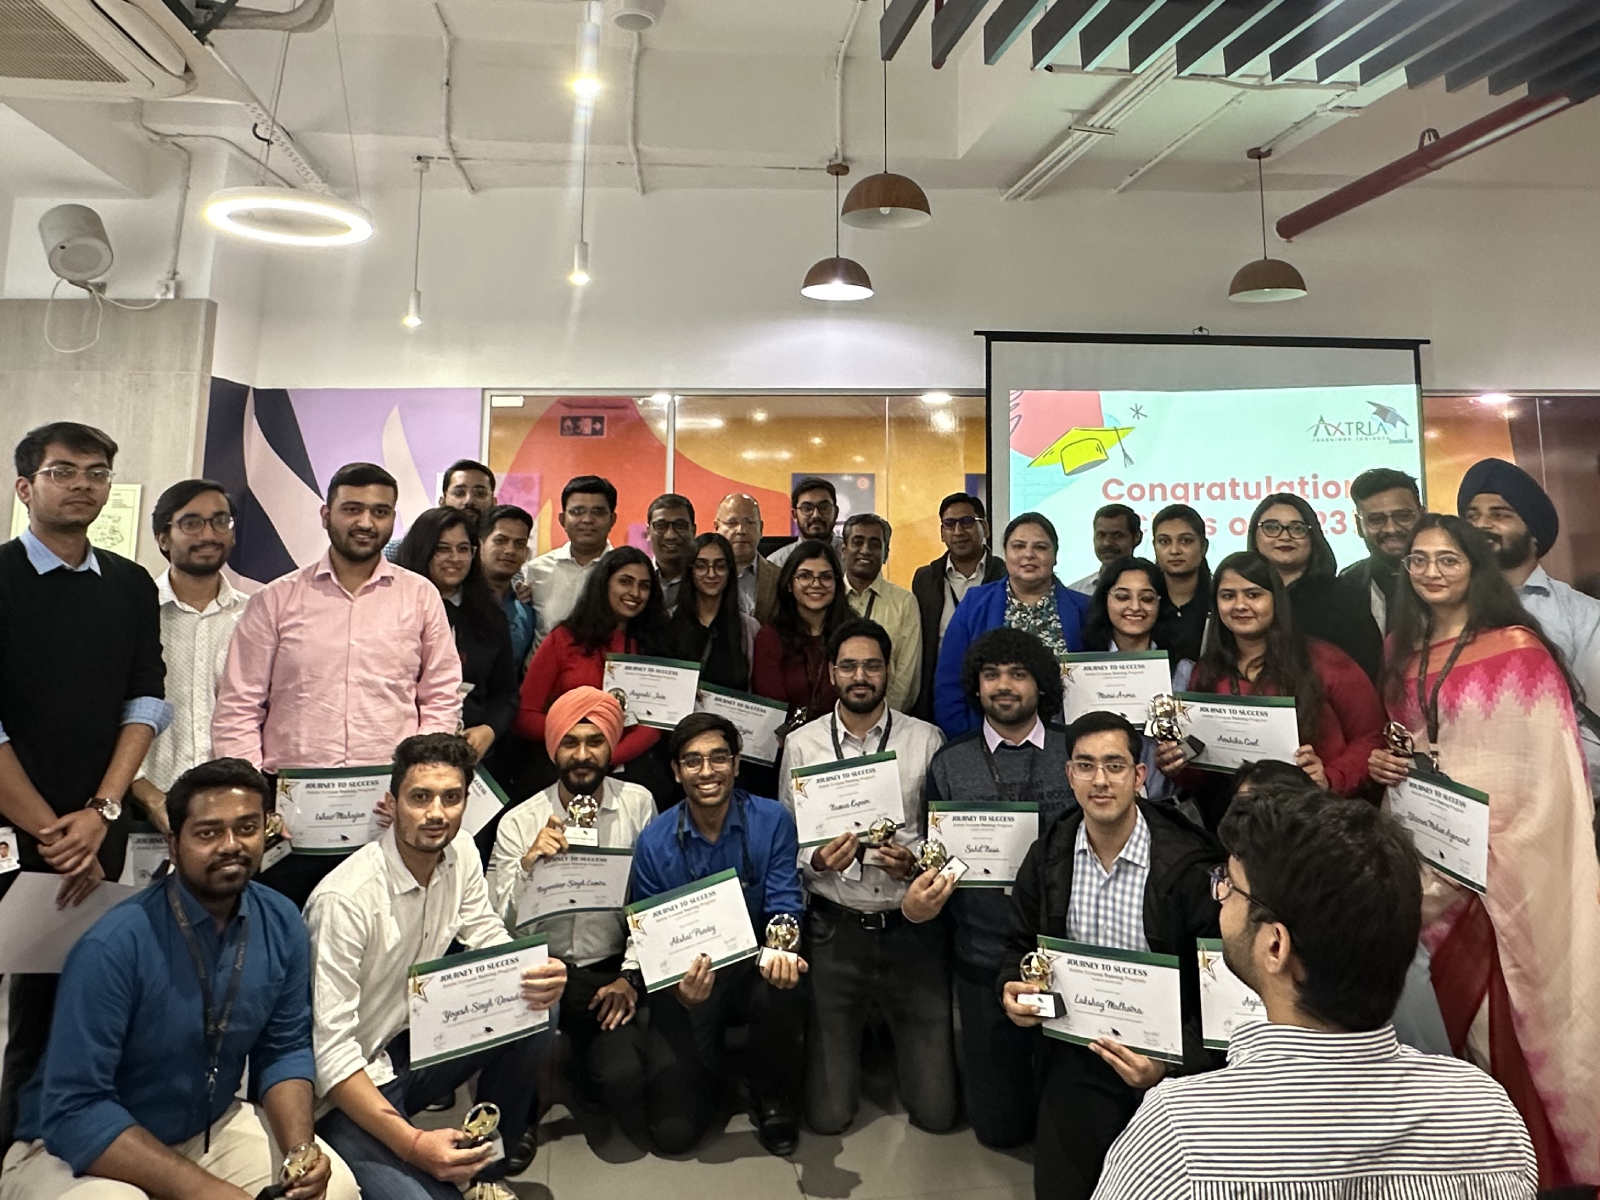 Axtria's campus recruits celebrate their Graduation Day at the Workplace